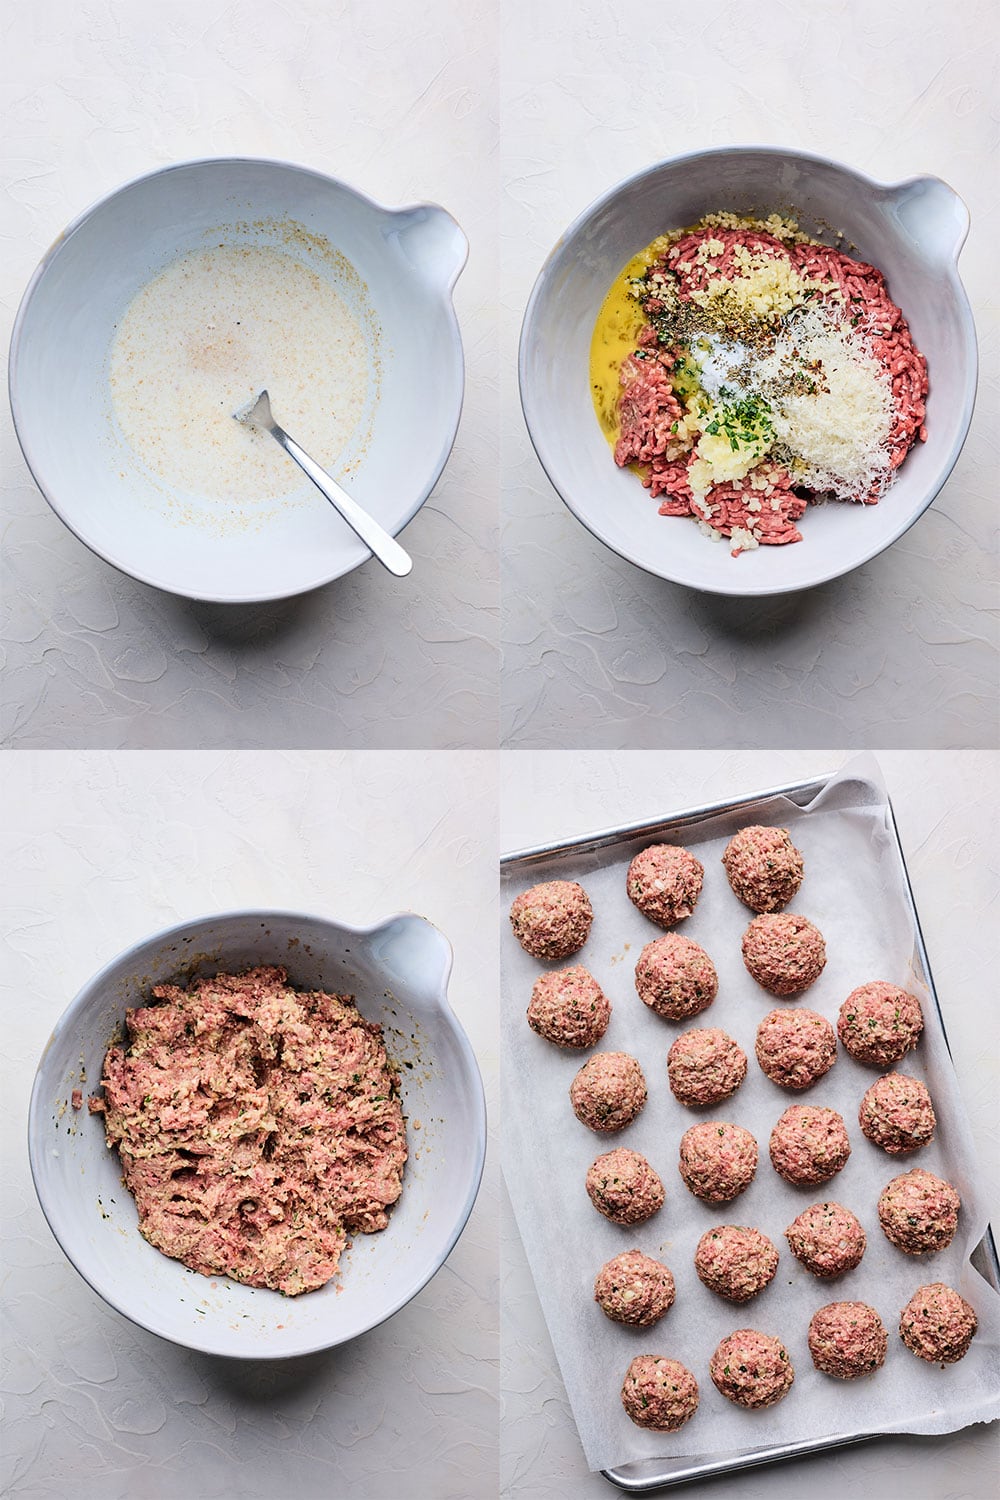 Spaghetti Meatballs step by step process part 1